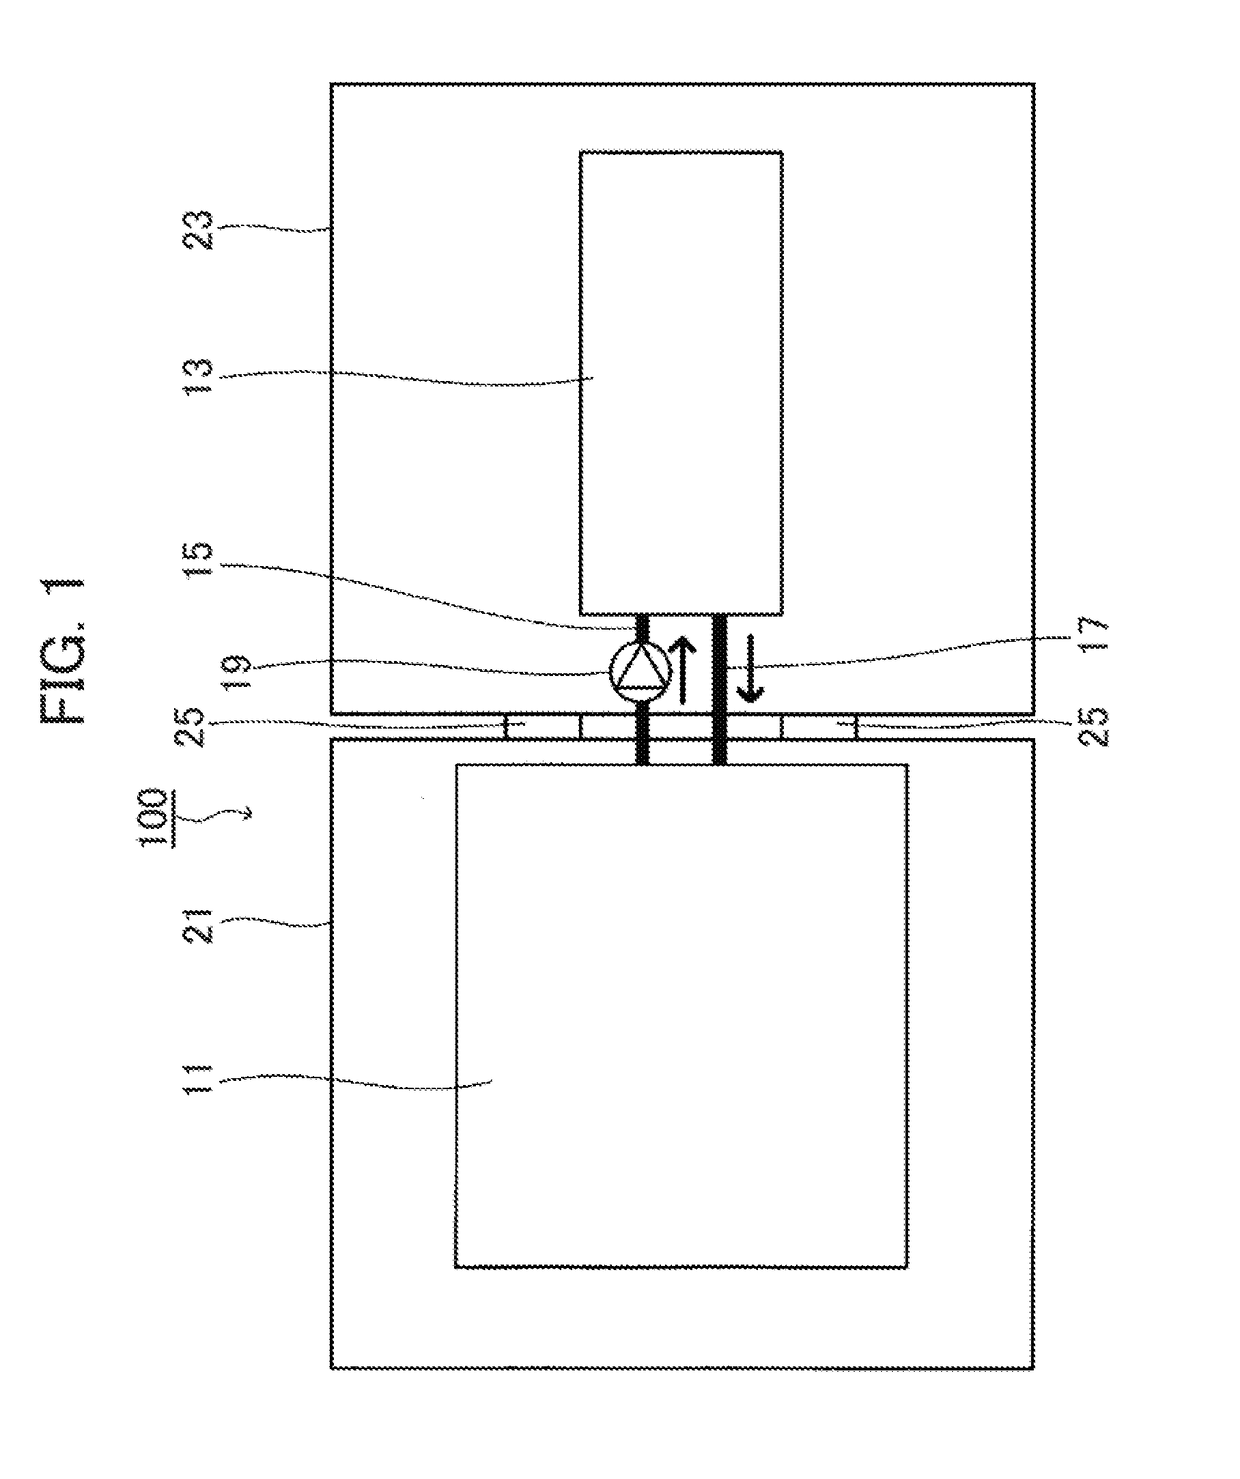 Electronic device cooling system